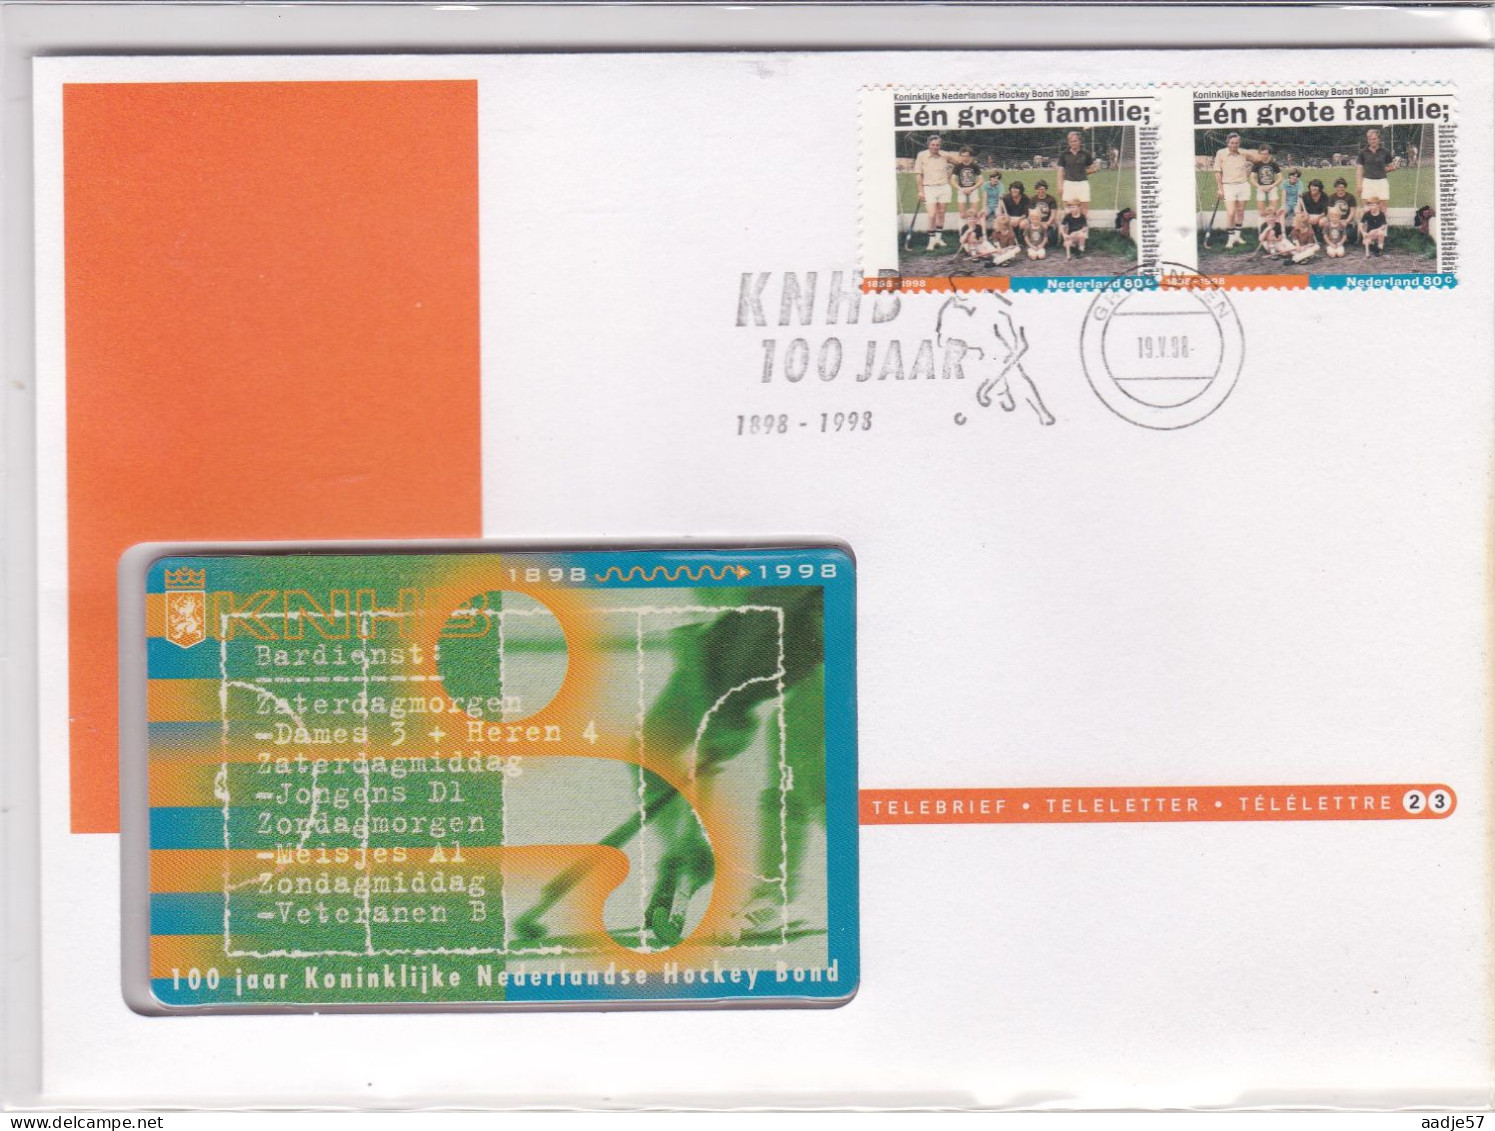 Netherlands Pays Bas Telebrief Teleletter With Phonecard Not Used 1998 KNHB 100 Jaar  19-05-1998 - Hockey (Veld)